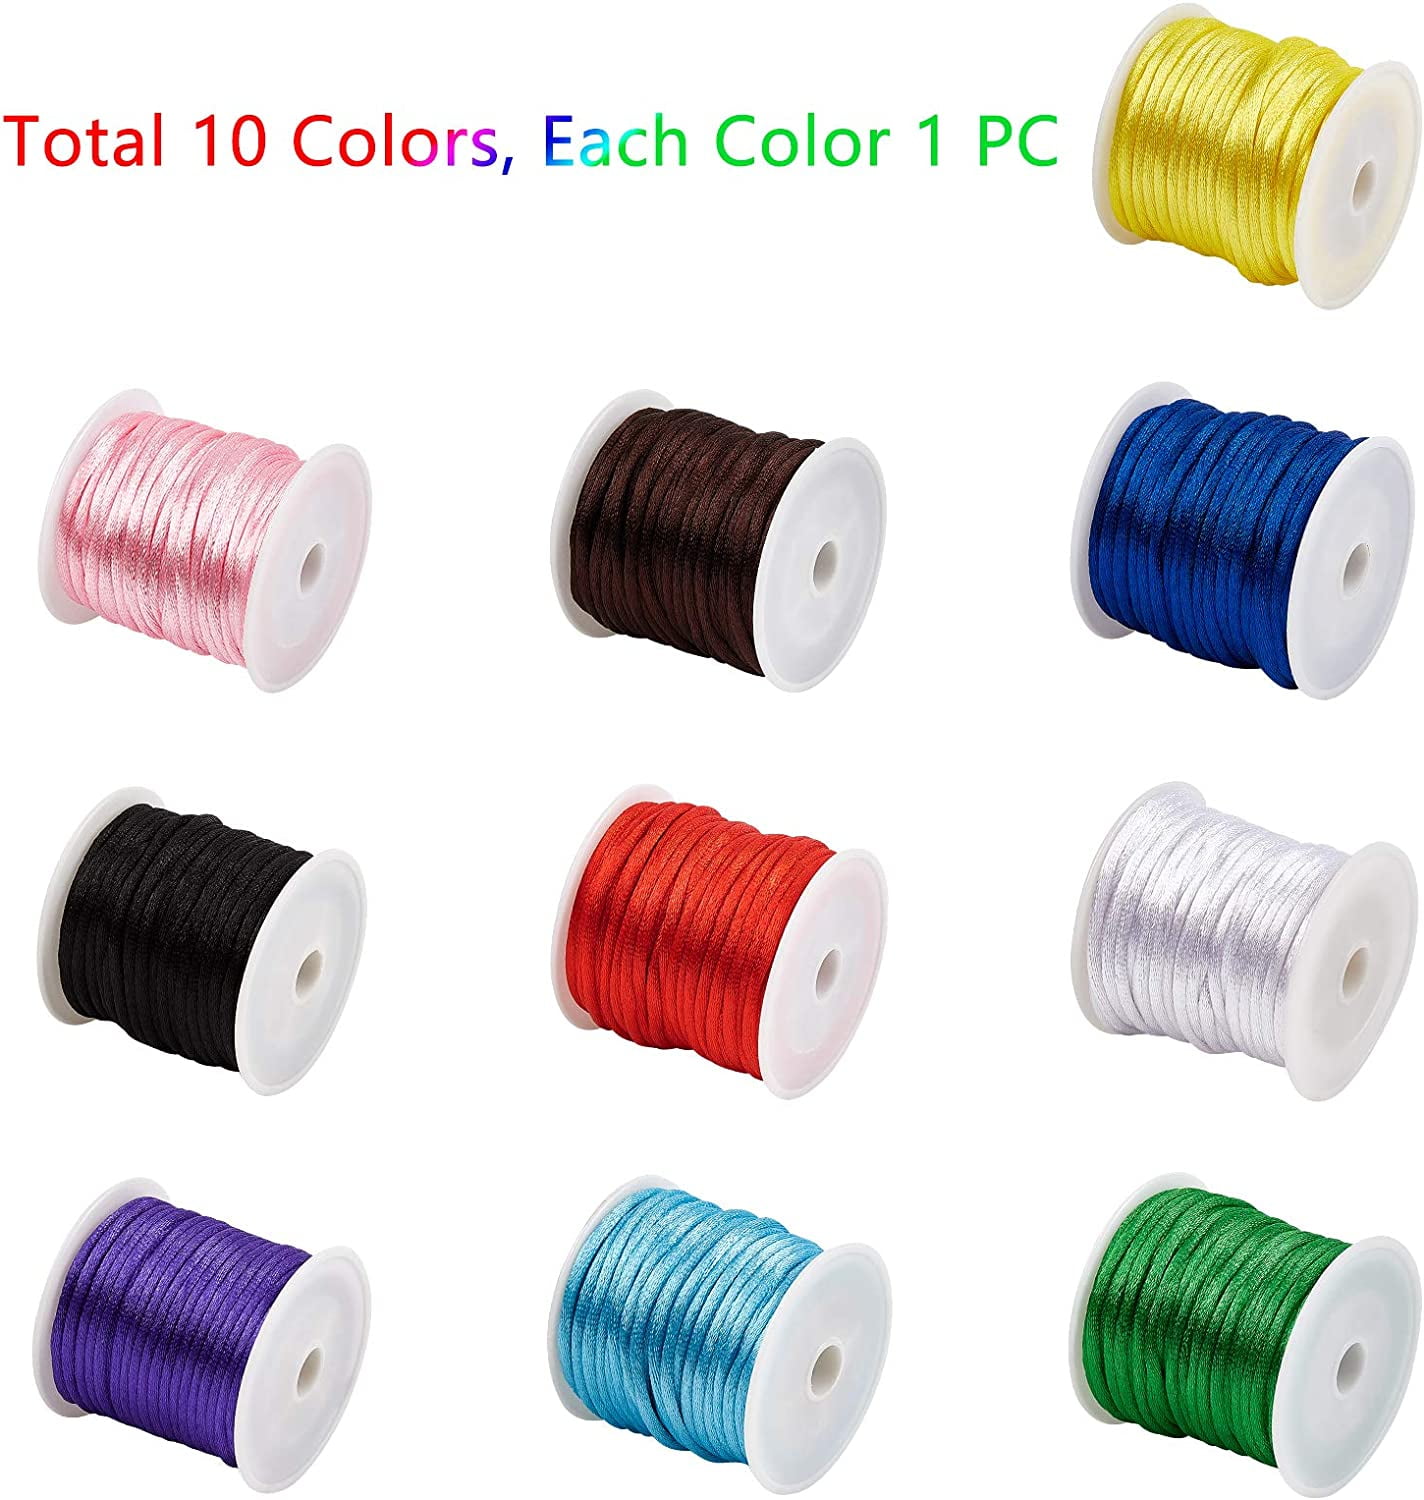 106 Yards Rattail Satin Cord 2mm Silver Silk Crafts Cords Christmas Beading  String for Necklace Macrame Friendship Bracelet Chinese Knot Dream